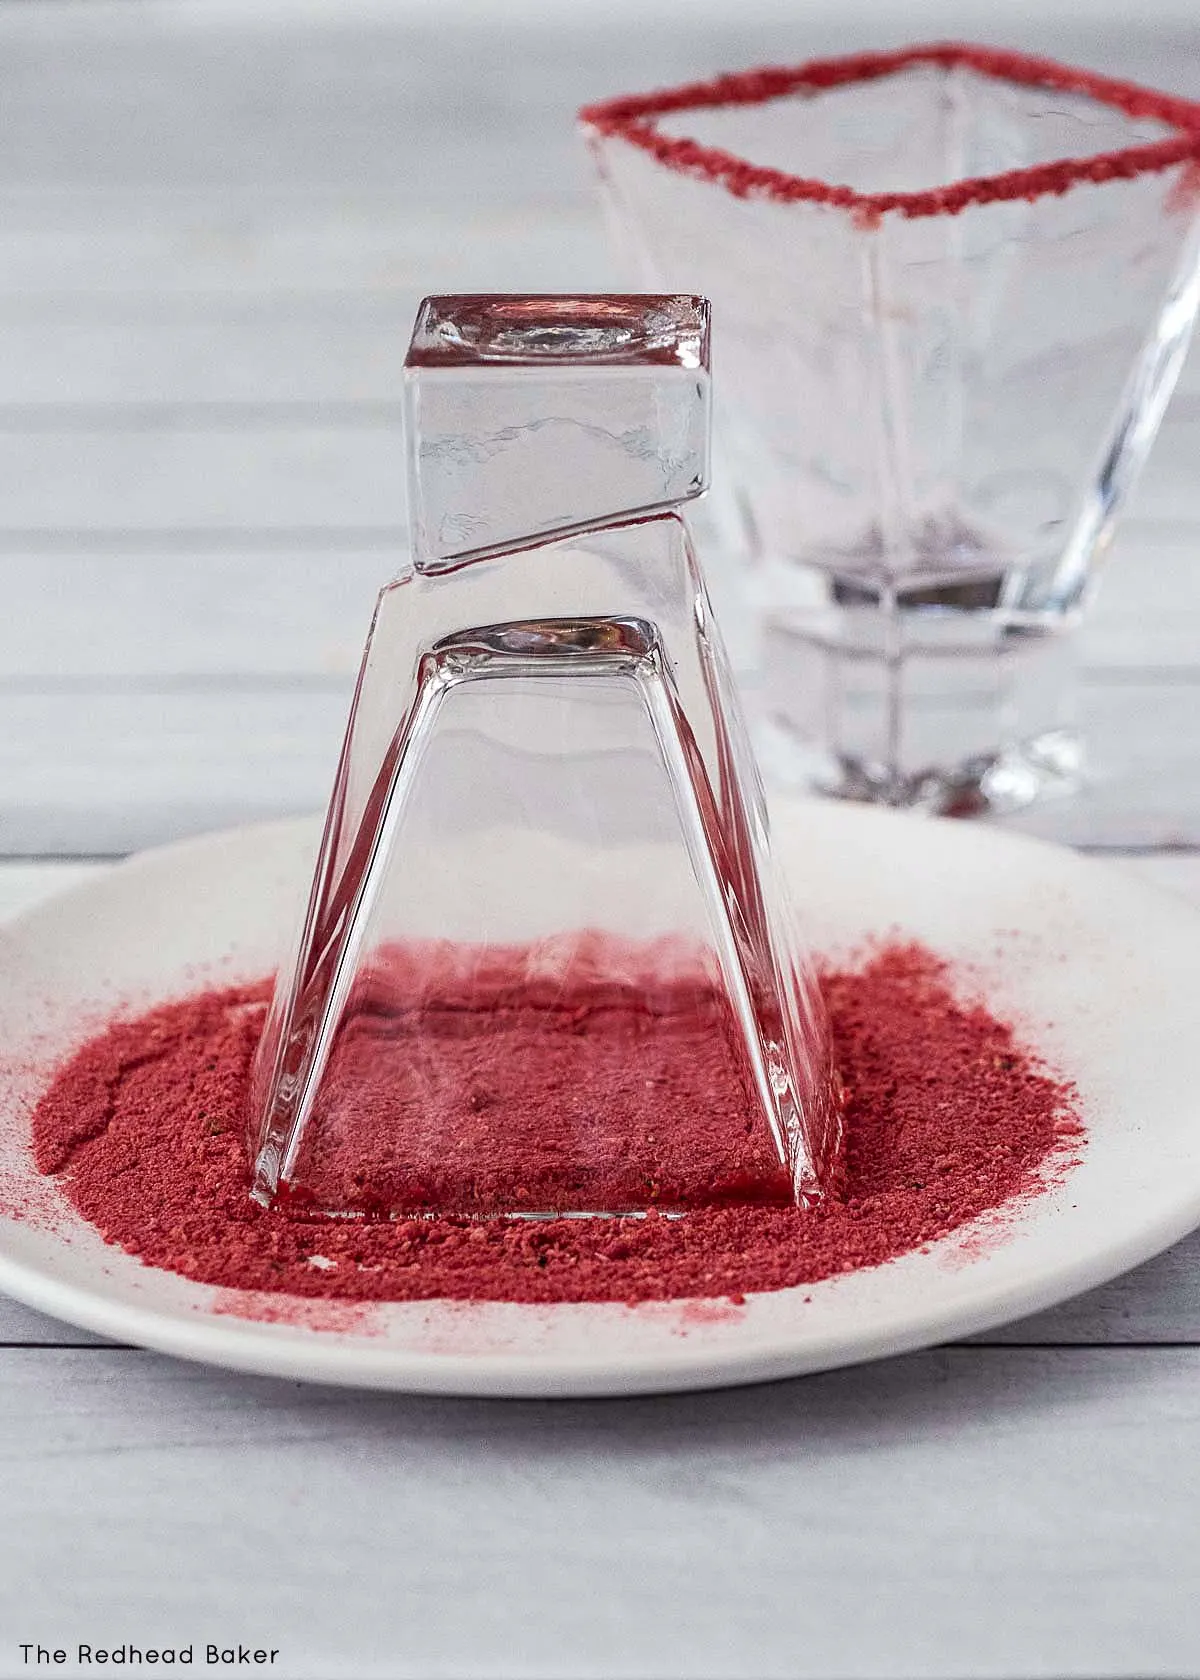 A martini glass sitting in a plate of powdered freeze-dried strawberries.